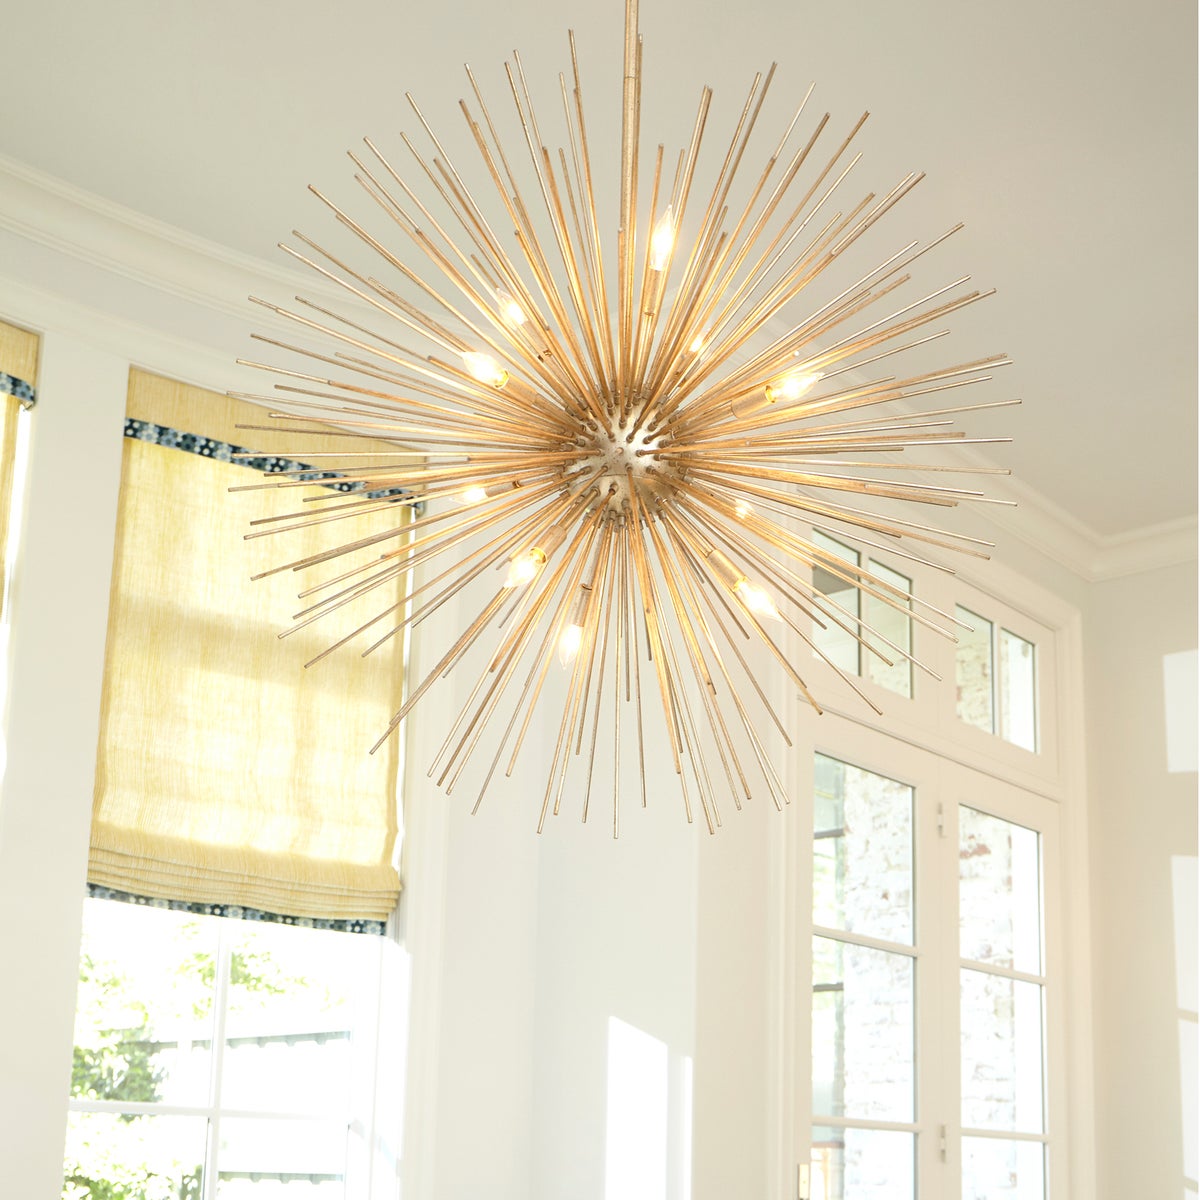 Modern Pendant Light: A gold chandelier with many lights, resembling an electrified dandelion. Creates a stunning focal point with burst of gold leaf spires and candelabra lighting.